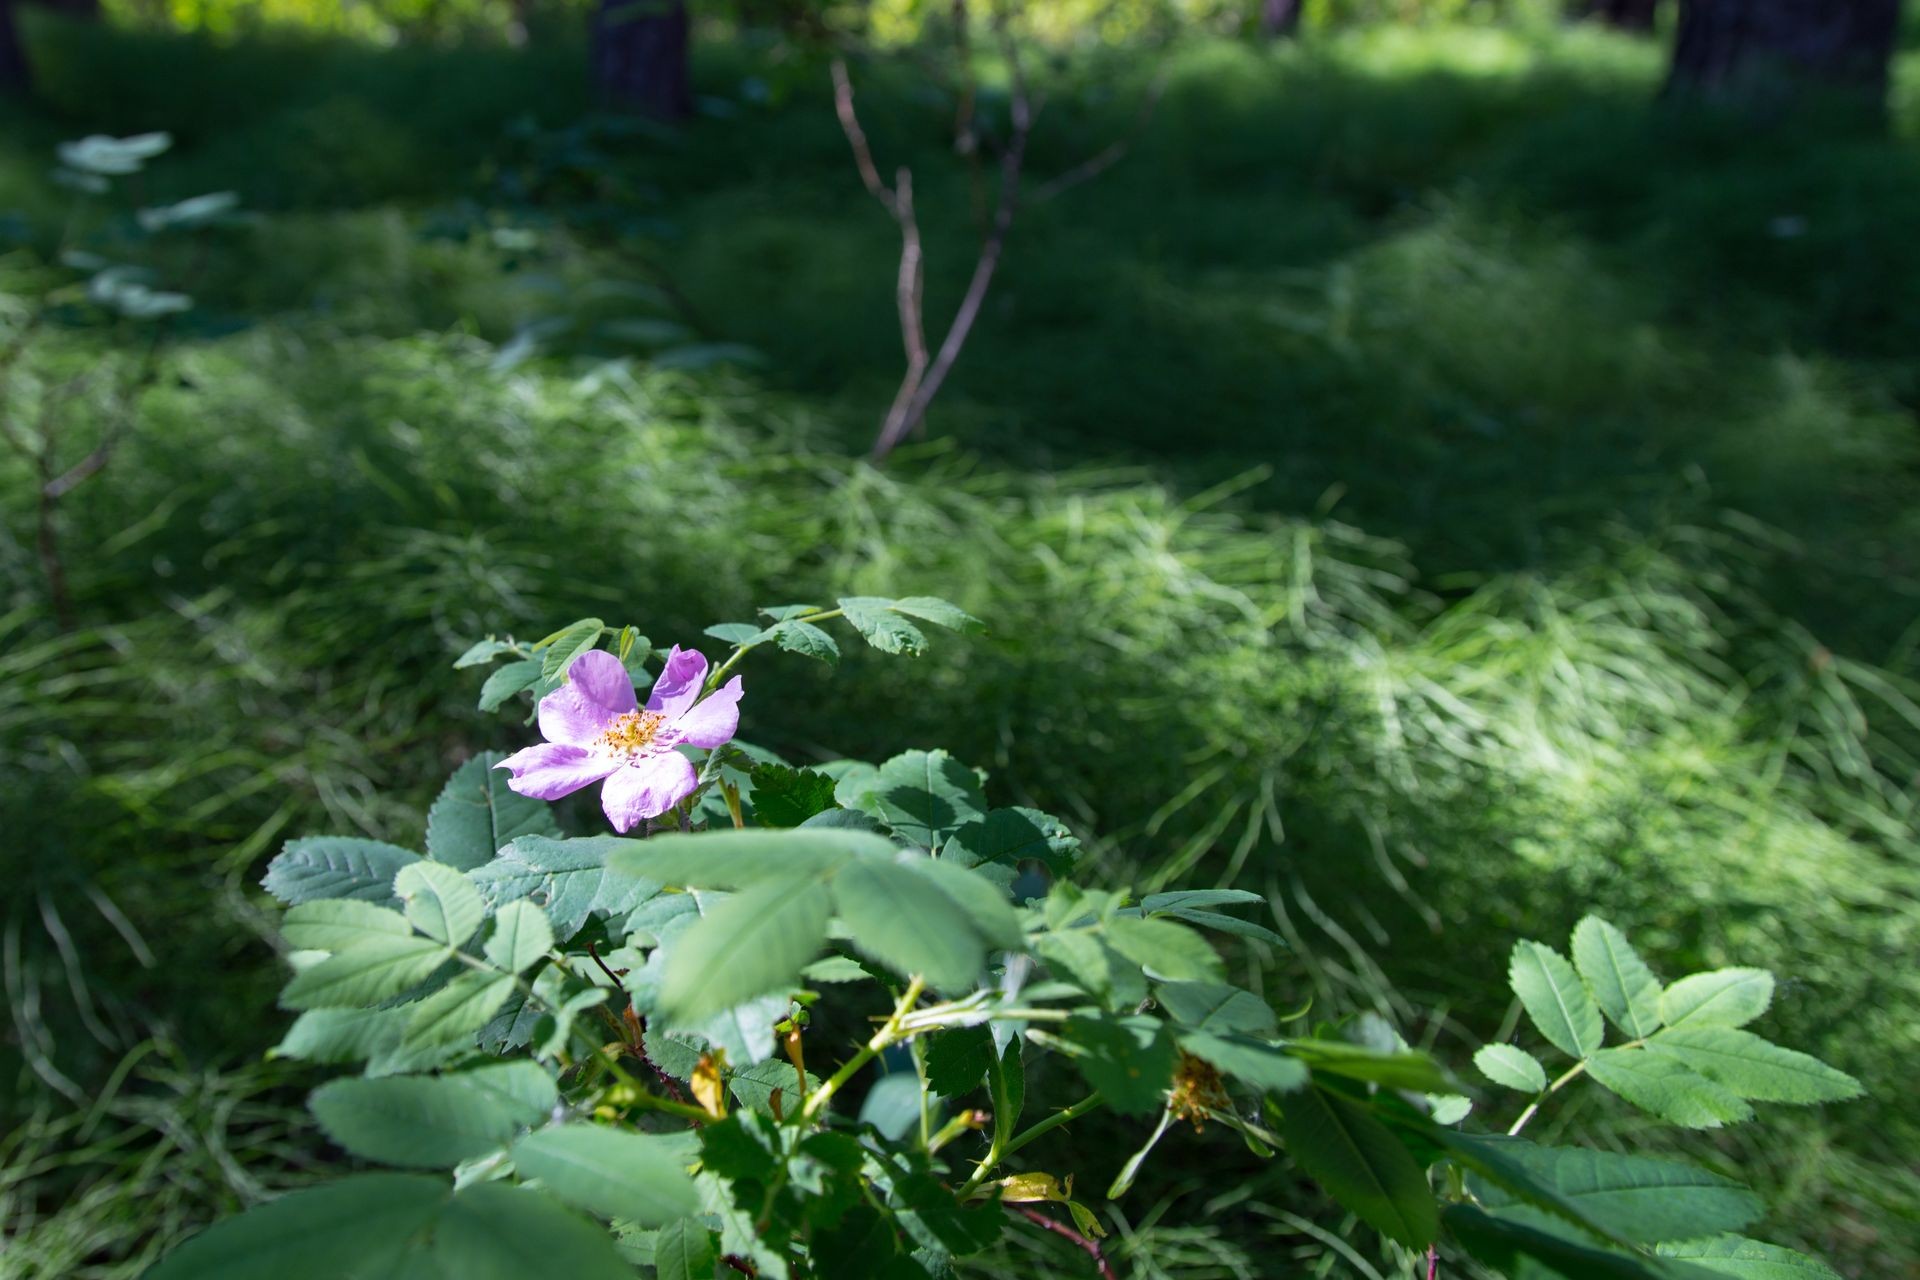 A Single Wild Rose in a sunlit patch of forest floor in Alberta's Foothills